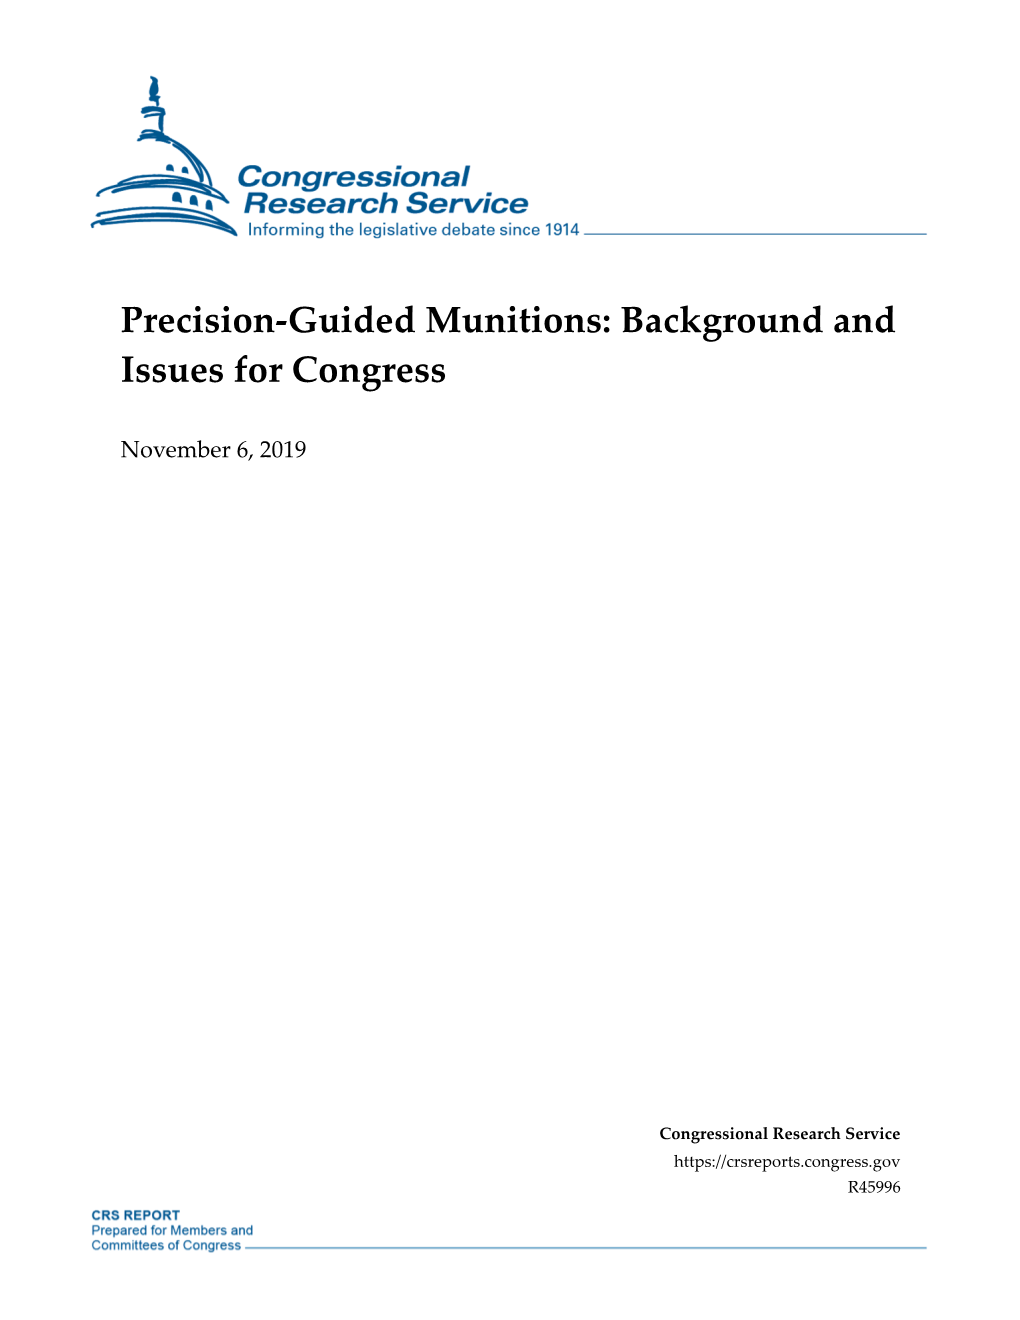 Precision-Guided Munitions: Background and Issues for Congress